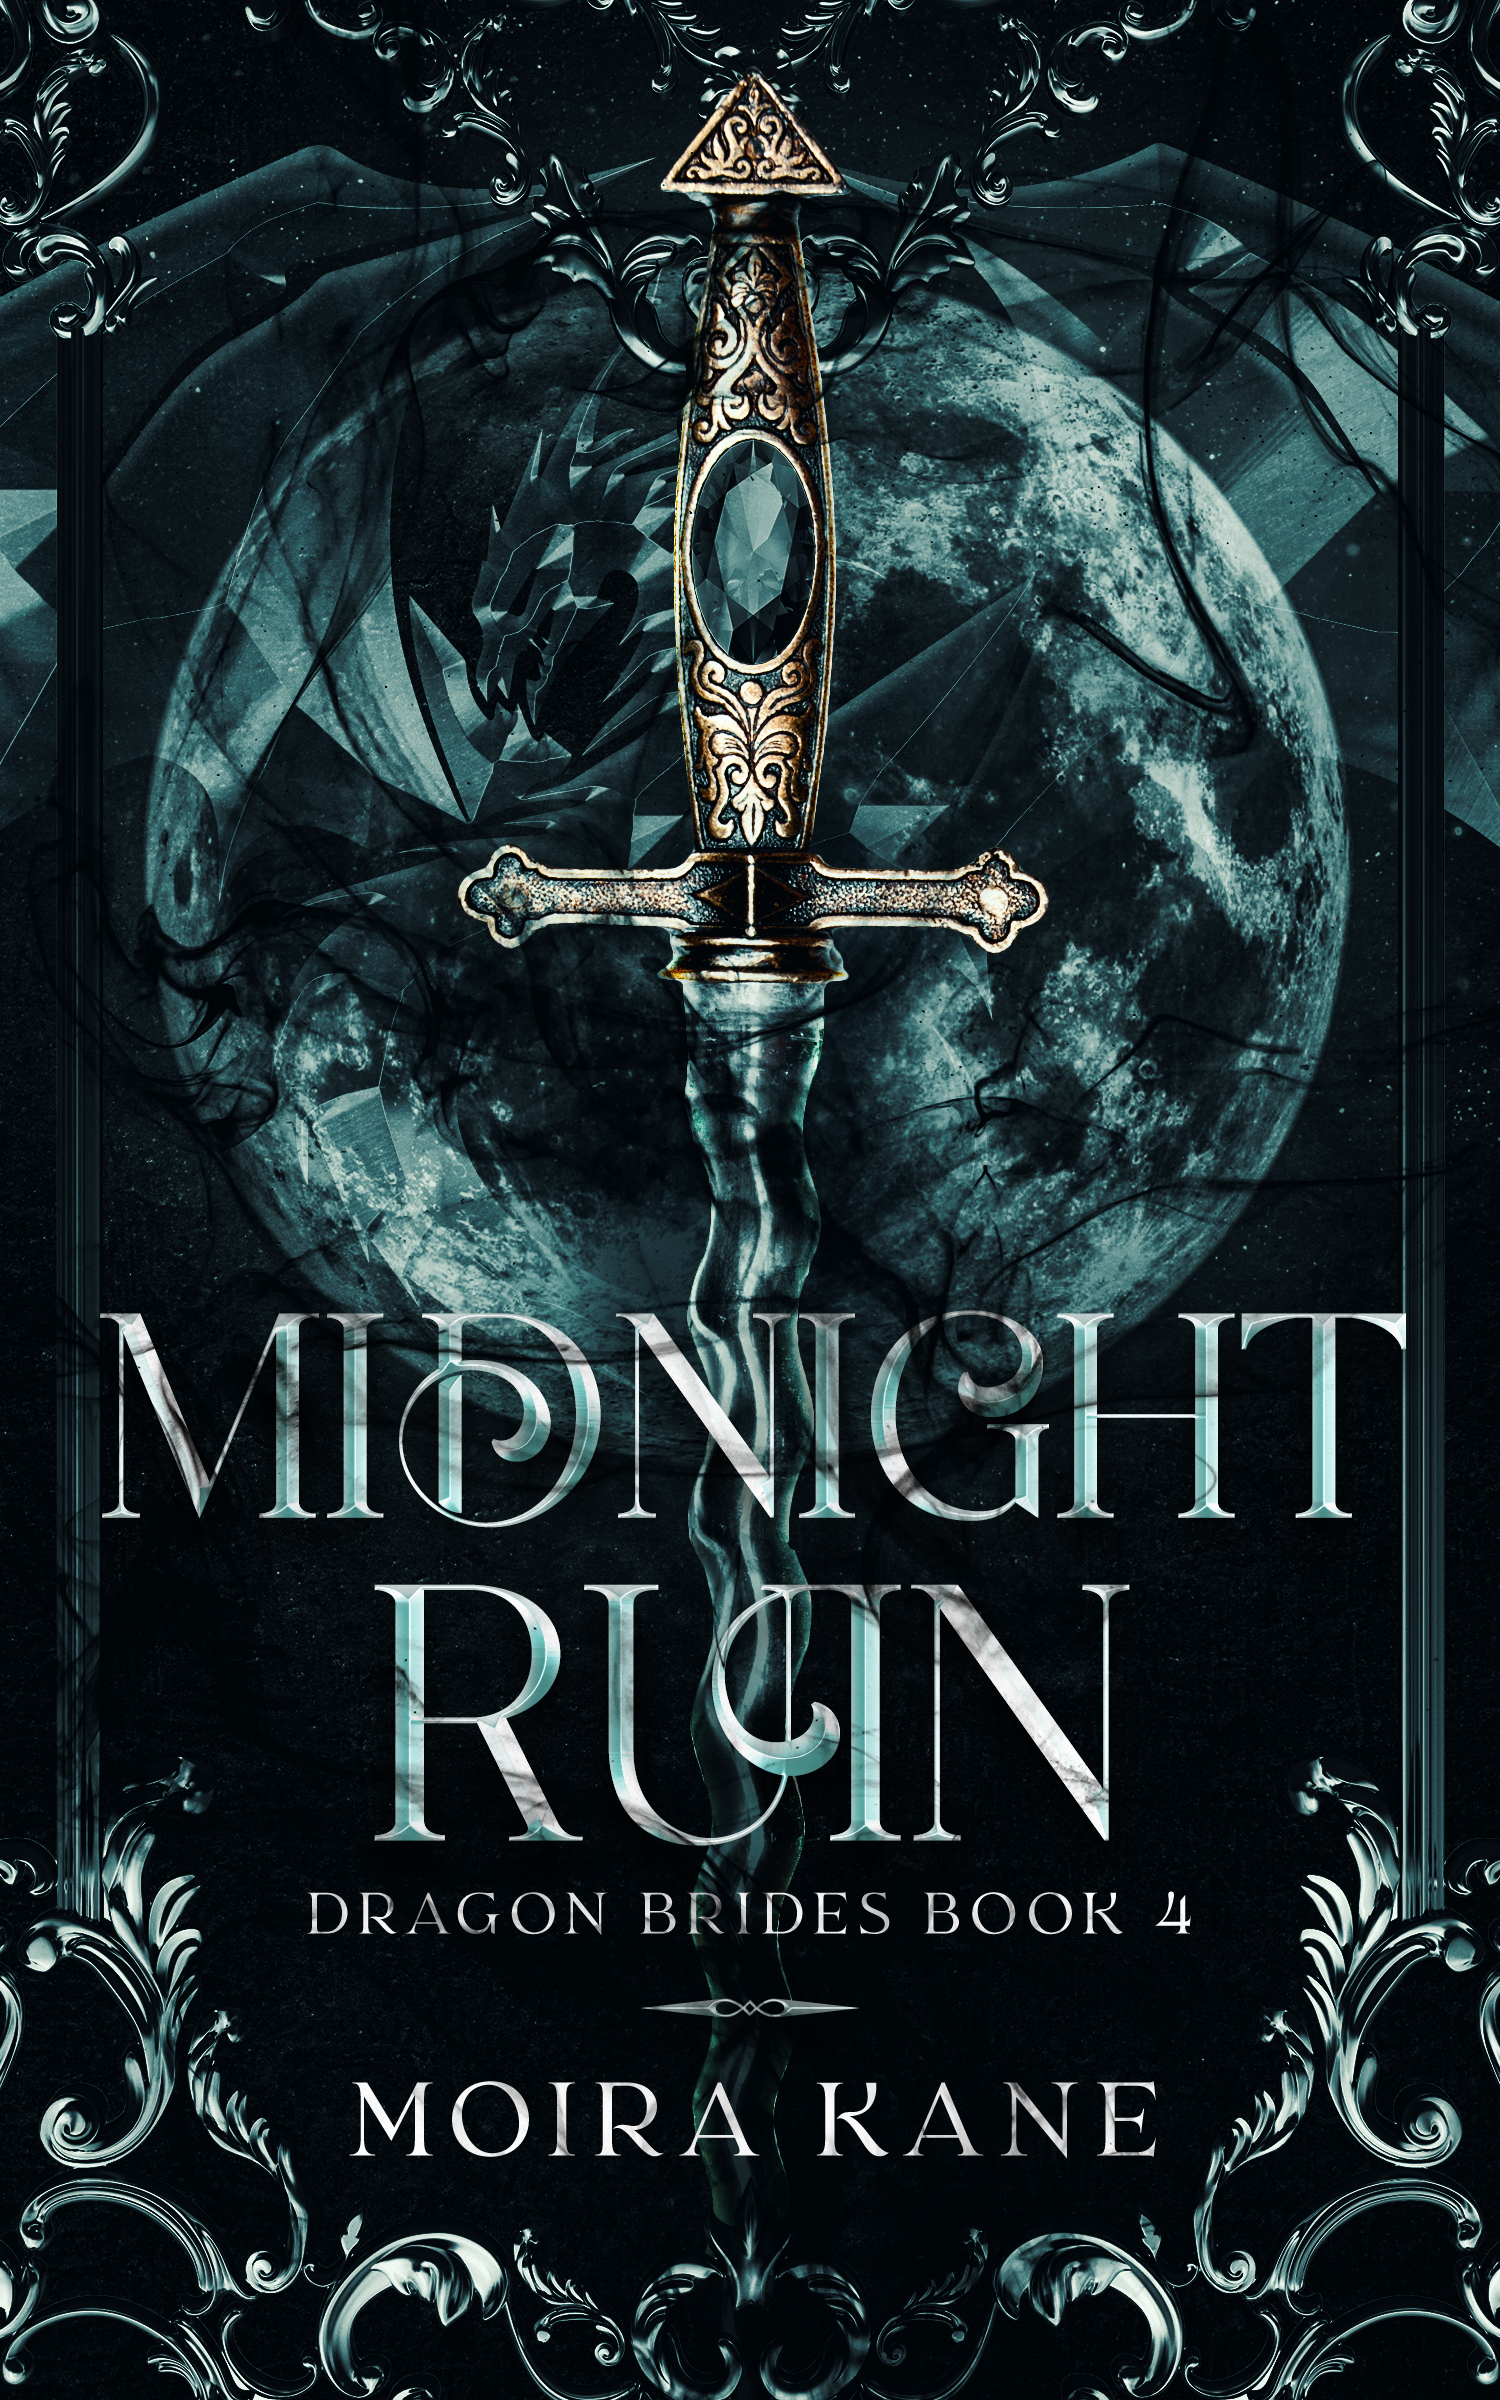 Black dagger with the full moon as a background. Image text reads Midnight Ruin by Moira Kane